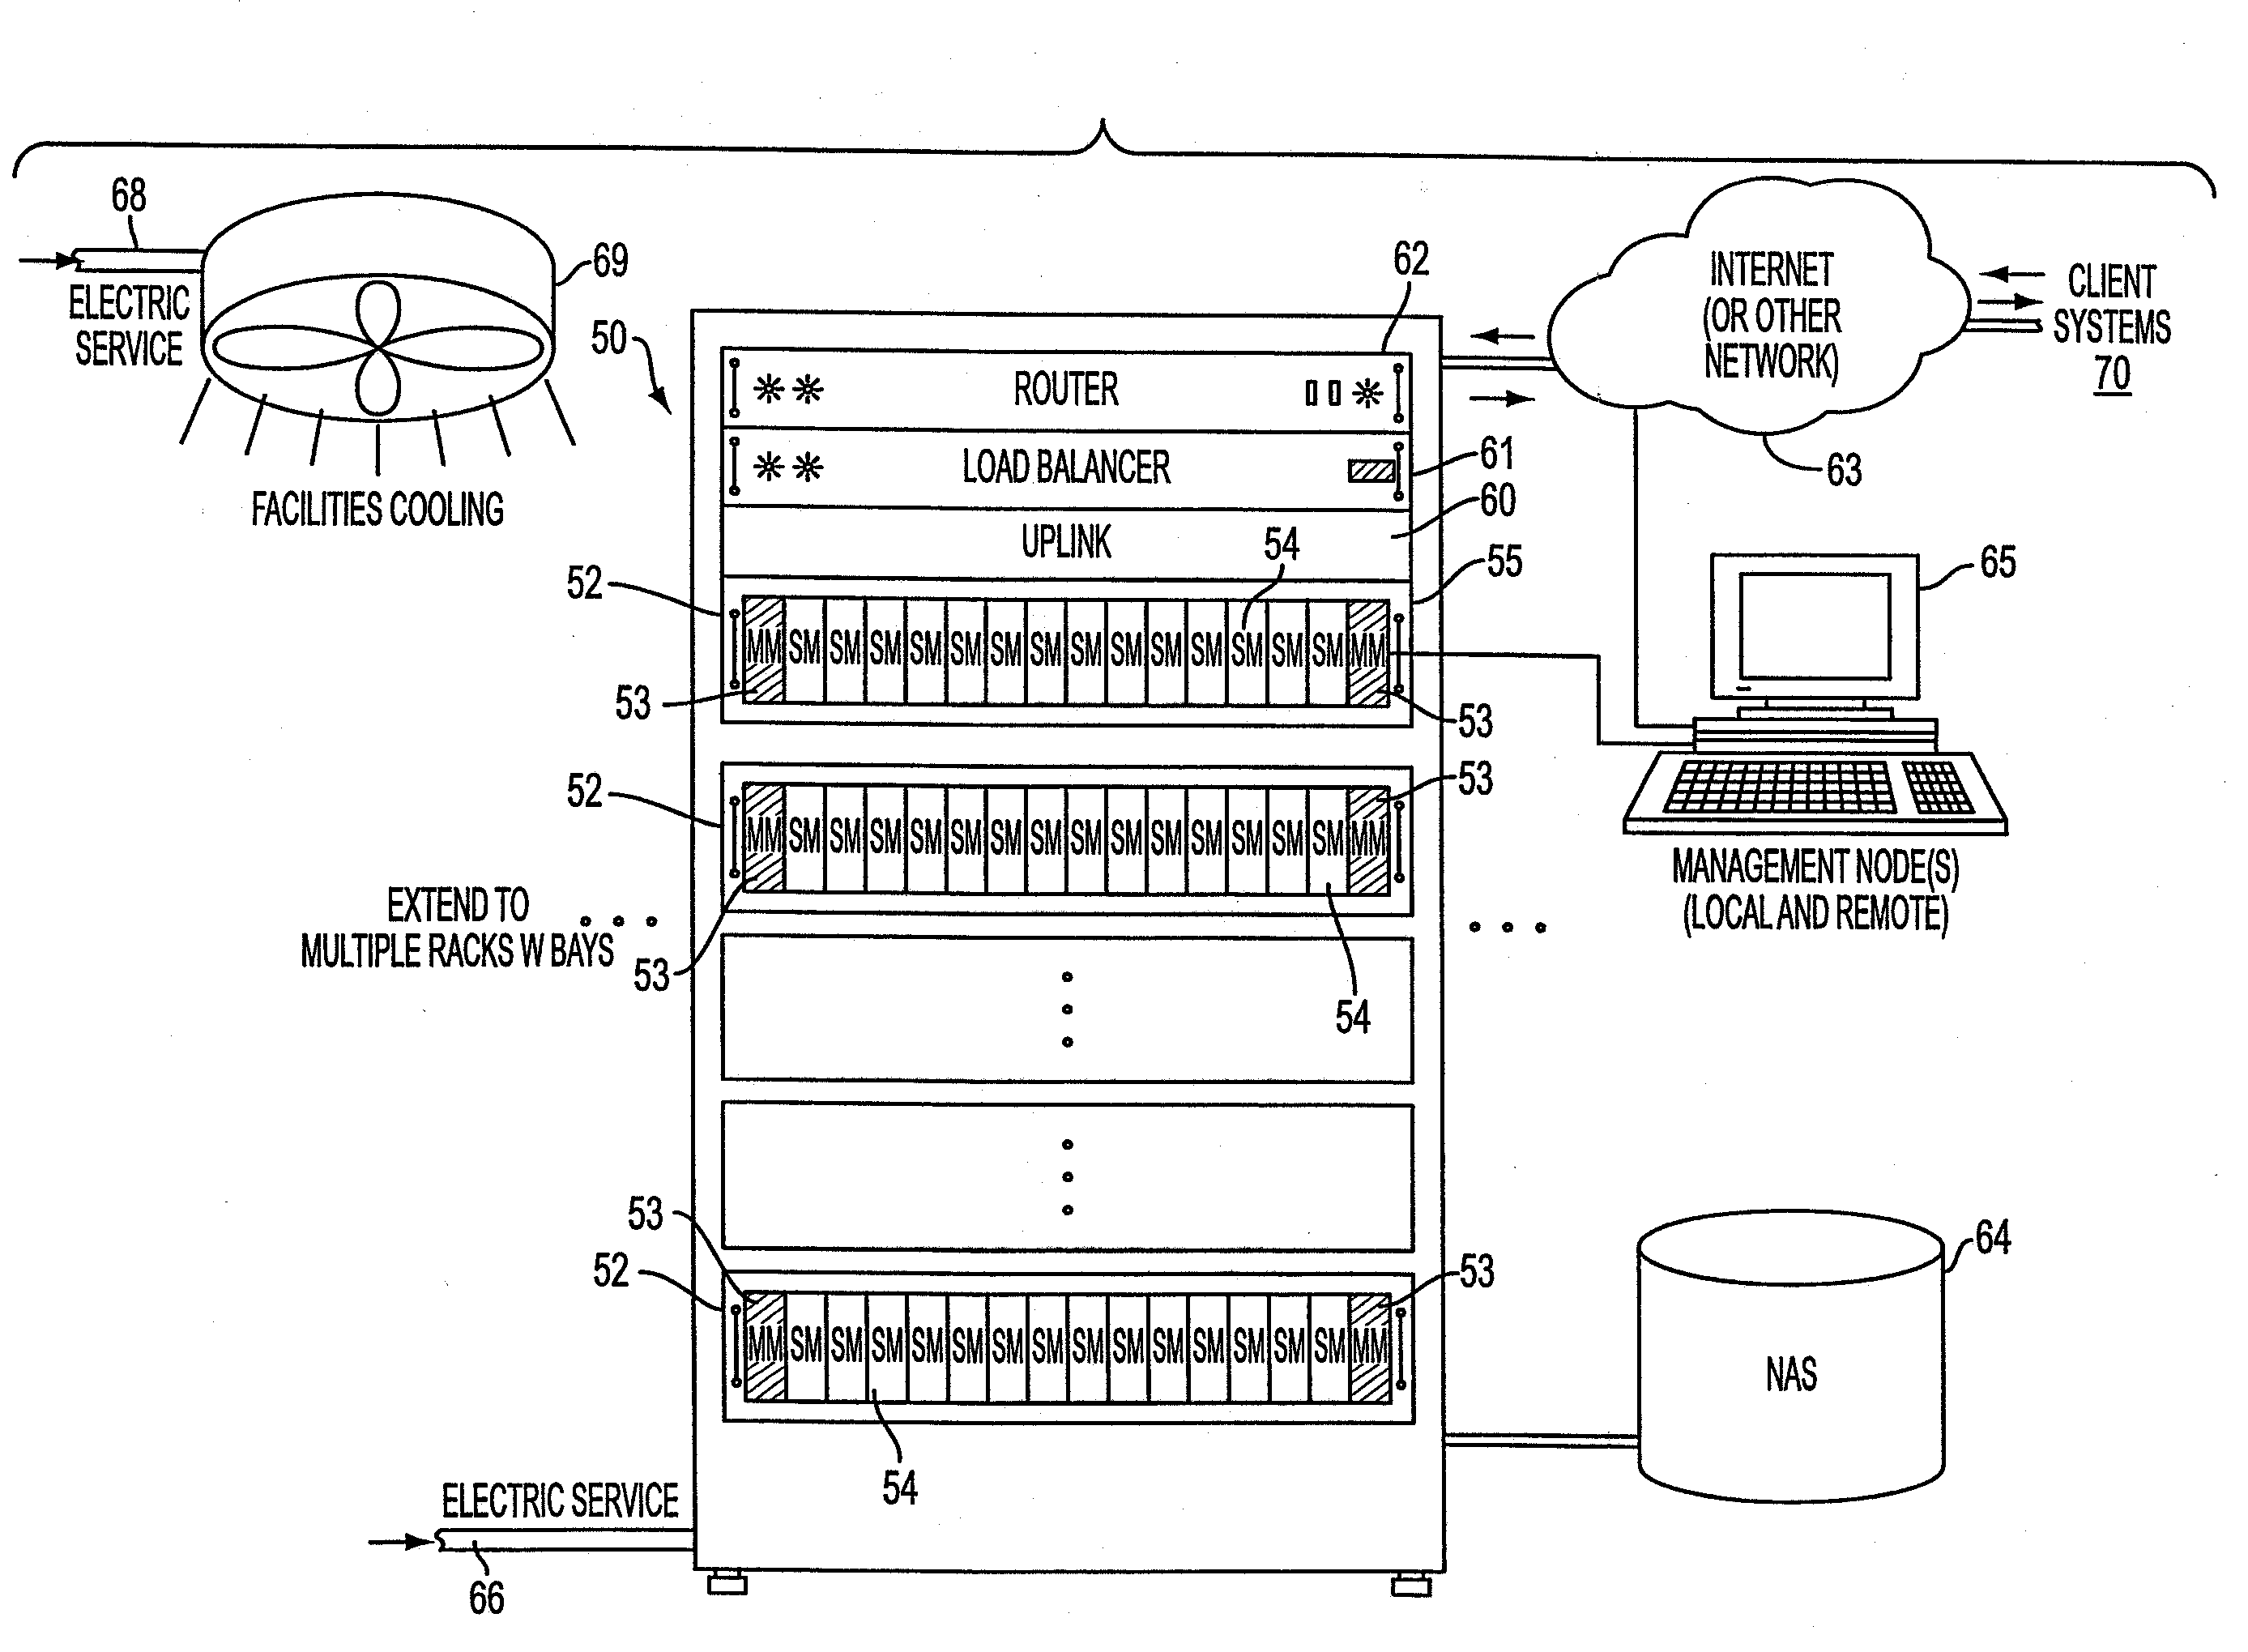 Apparatus and method for modular dynamically power managed power supply and cooling system for computer systems, server applications, and other electronic devices